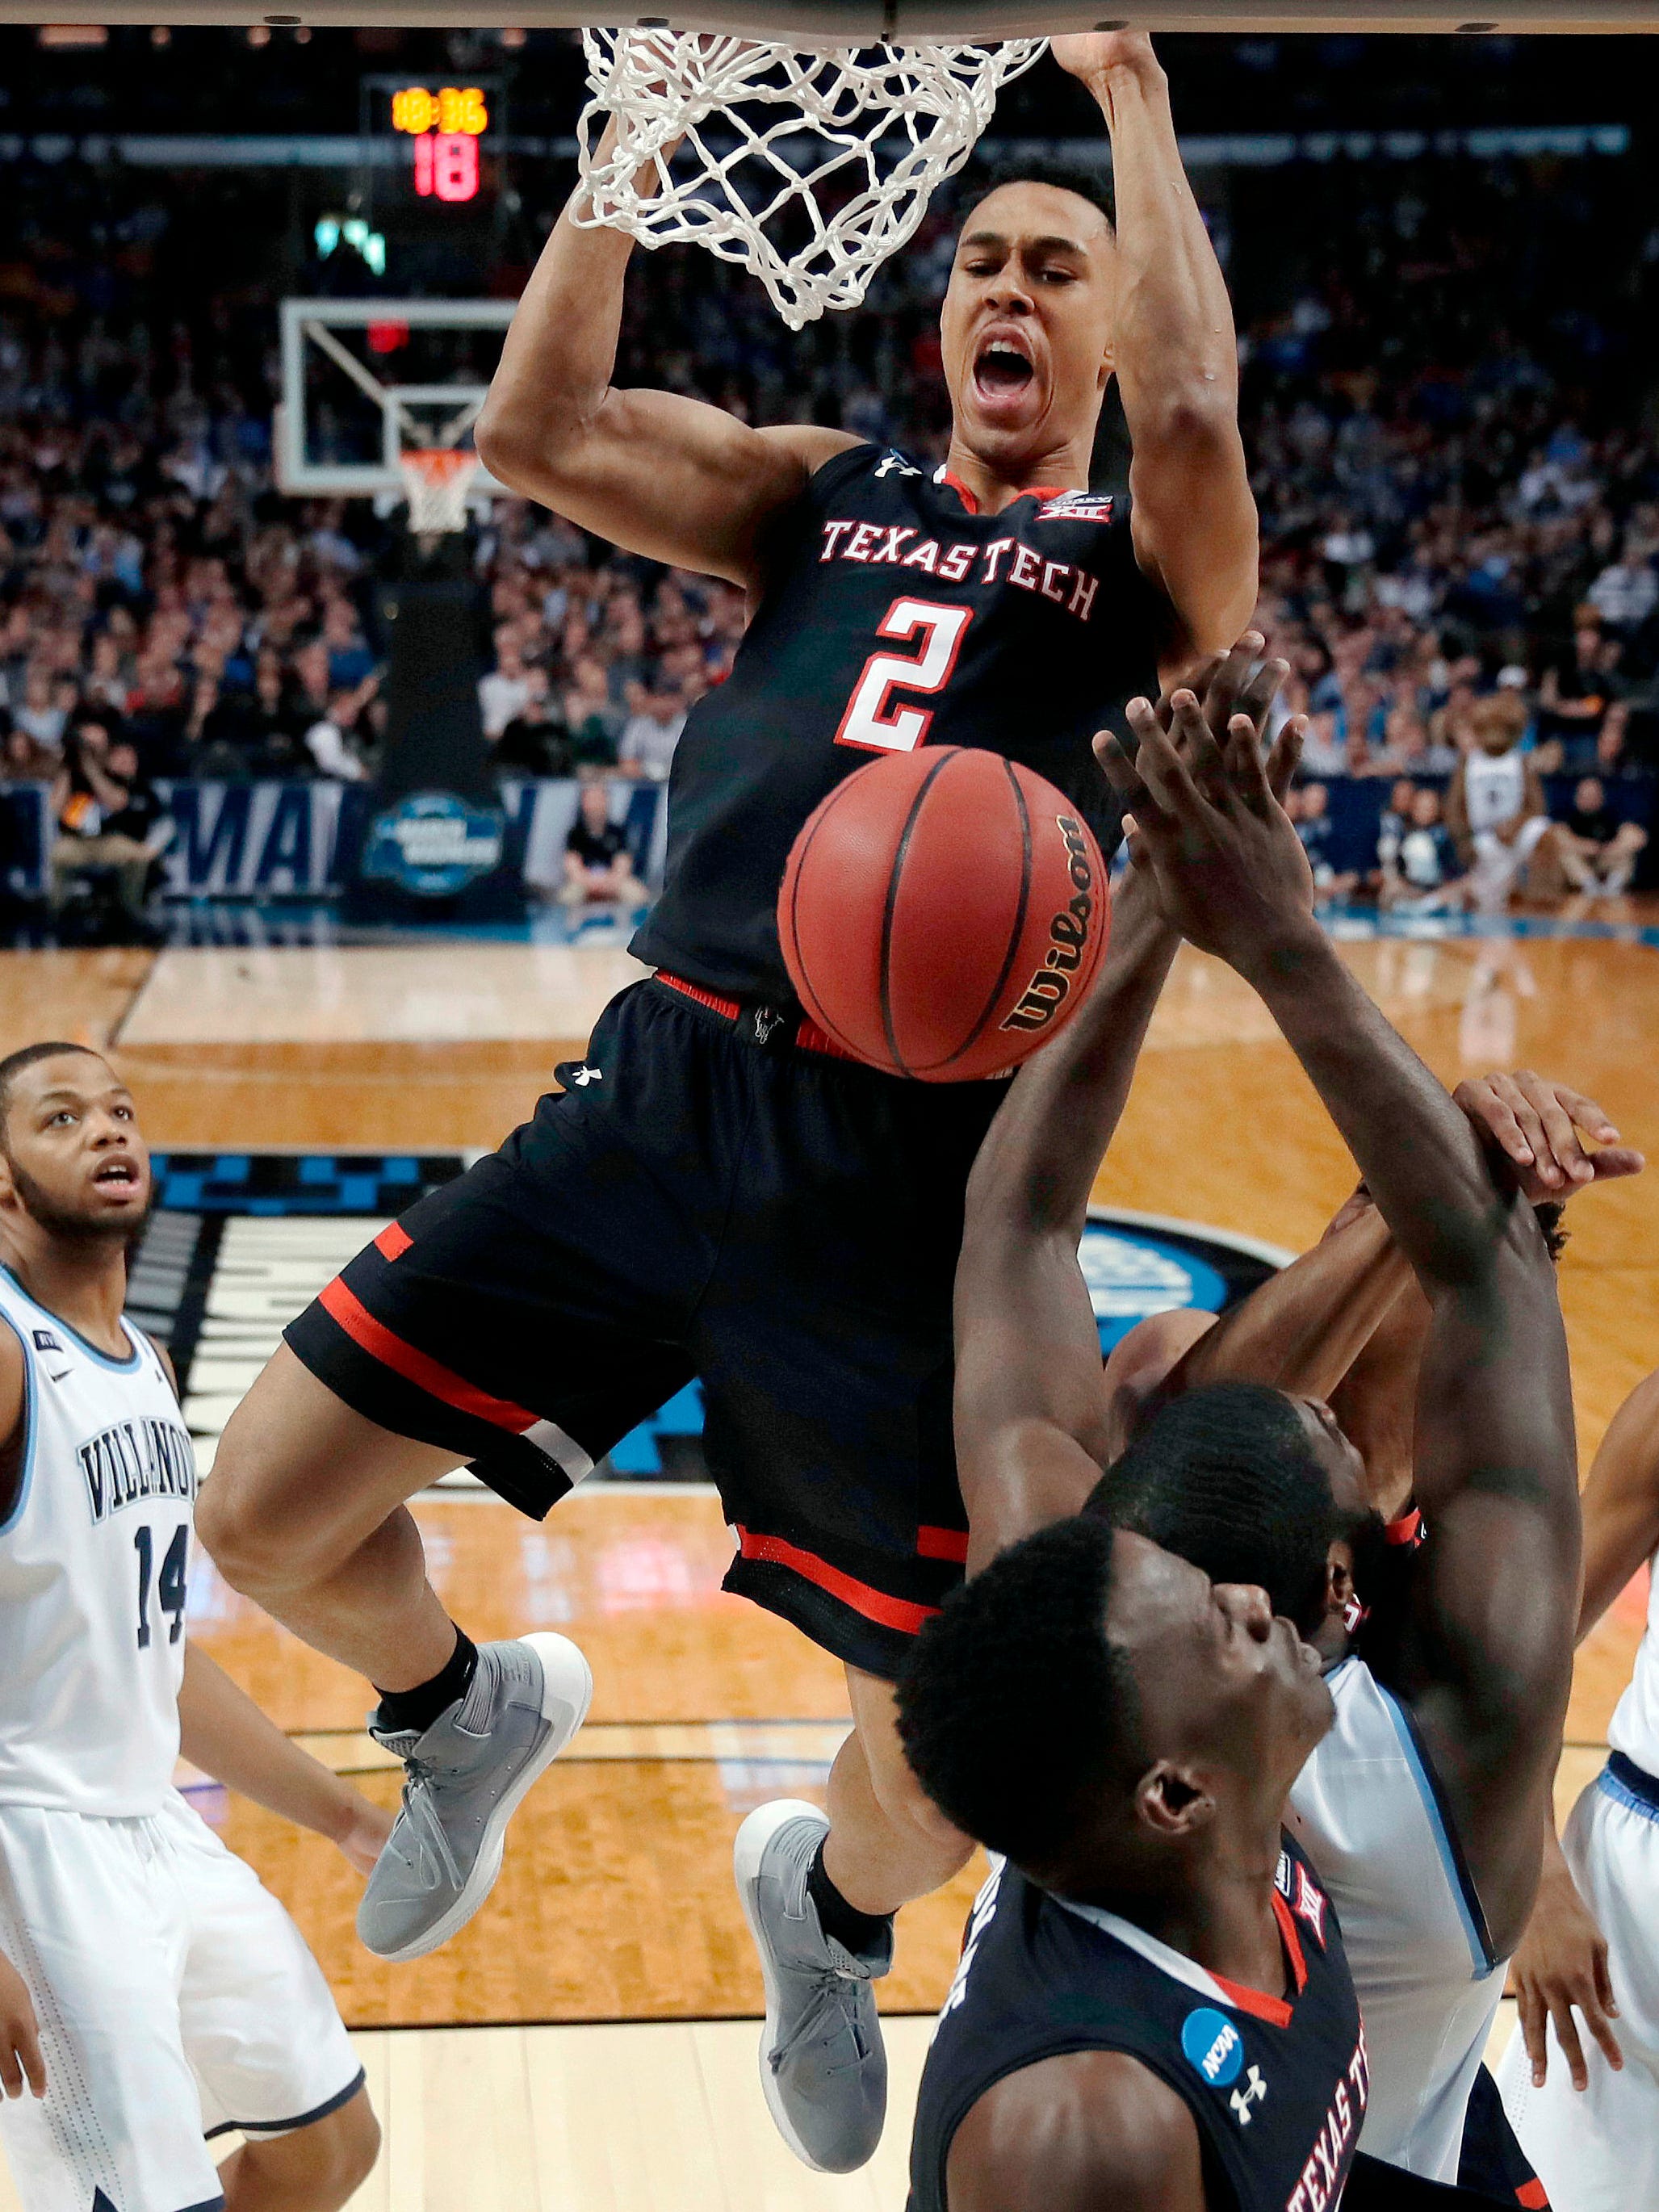 14. Denver Nuggets: Zhaire Smith, wing, Fr., Texas Tech. Smith has rocketed up many draft boards because of his immense athleticism and potential. He’s still somewhat raw. He converted 45 percent on 3-pointers, but had limited attempts. With Gary Harris (Michigan State), the Nuggets don't have an immediate need at shooting guard, so Smith can take some time to develop.